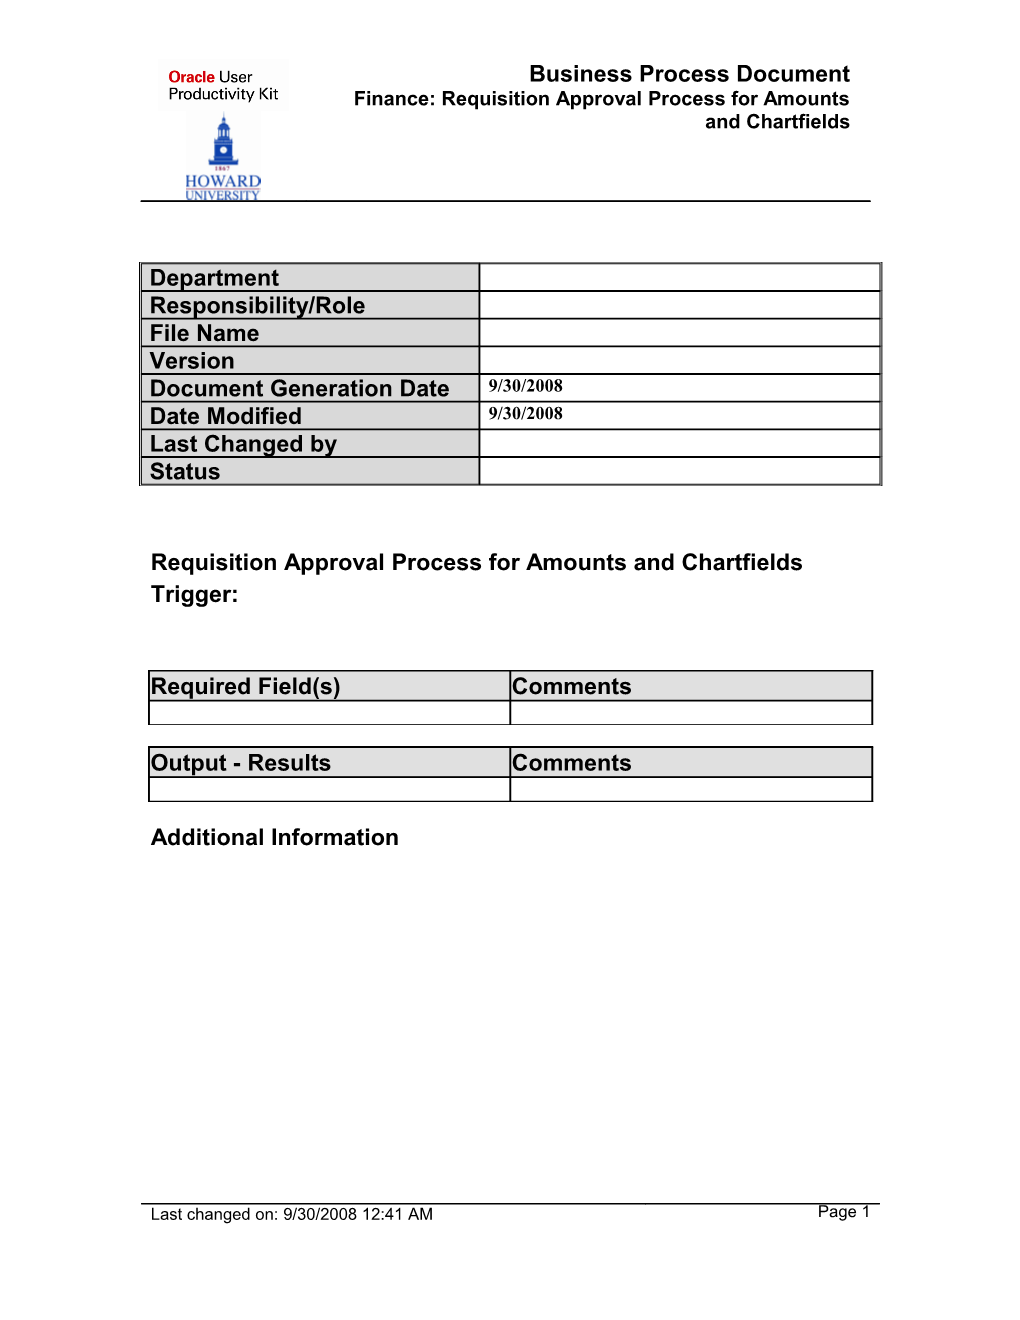 Requisition Approval Process for Amounts and Chartfields